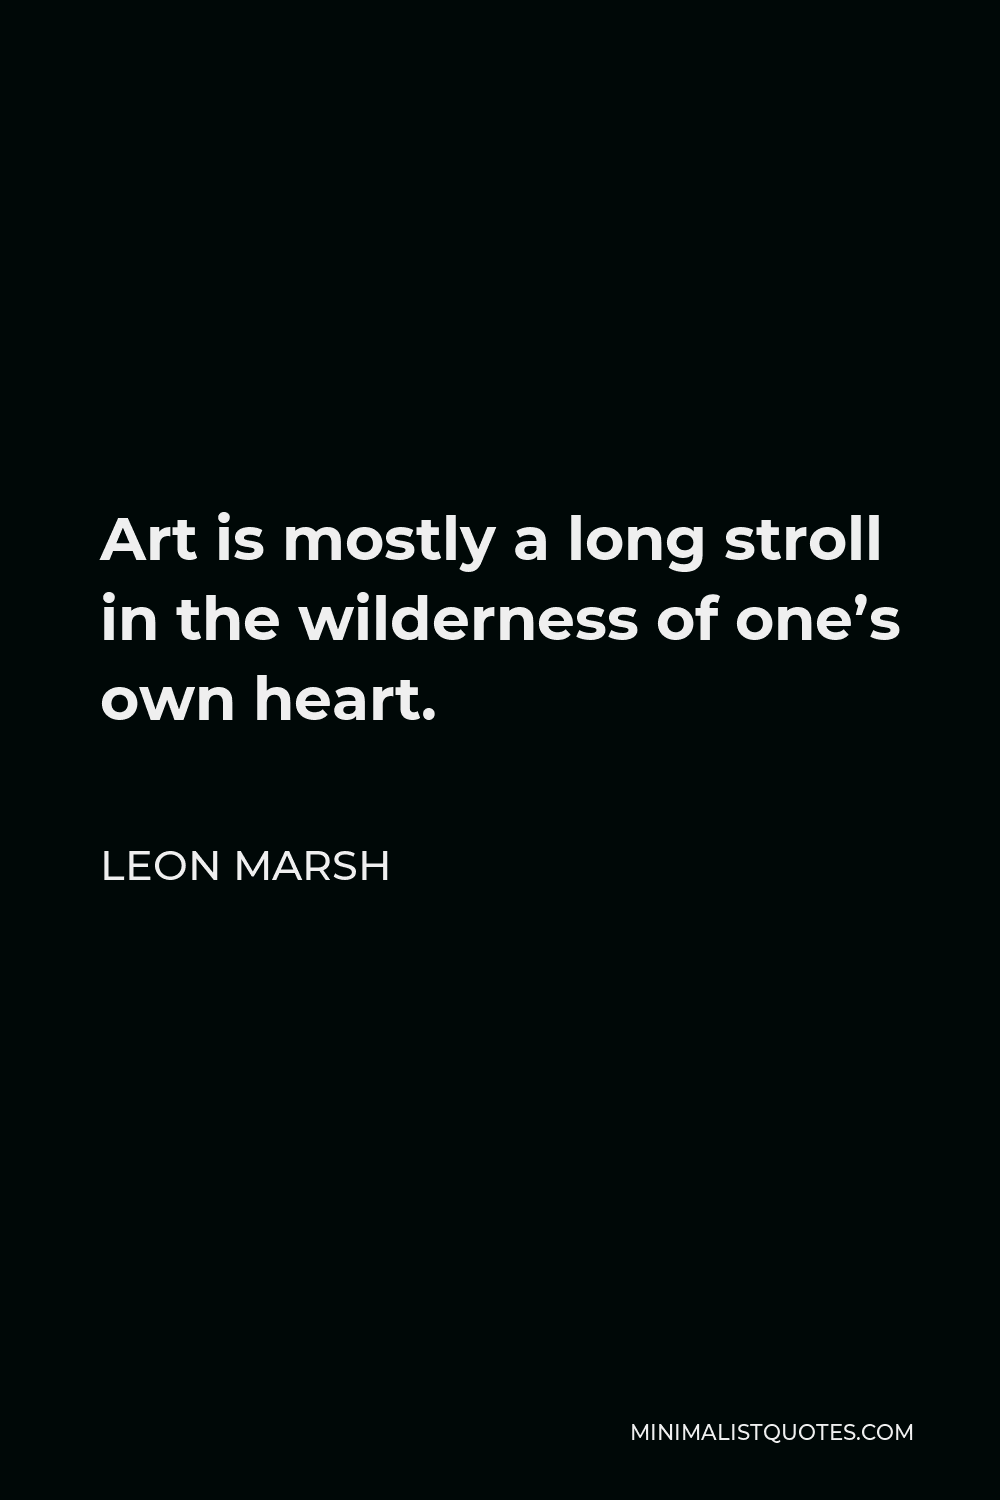 Leon Marsh Quote - Art is mostly a long stroll in the wilderness of one’s own heart.